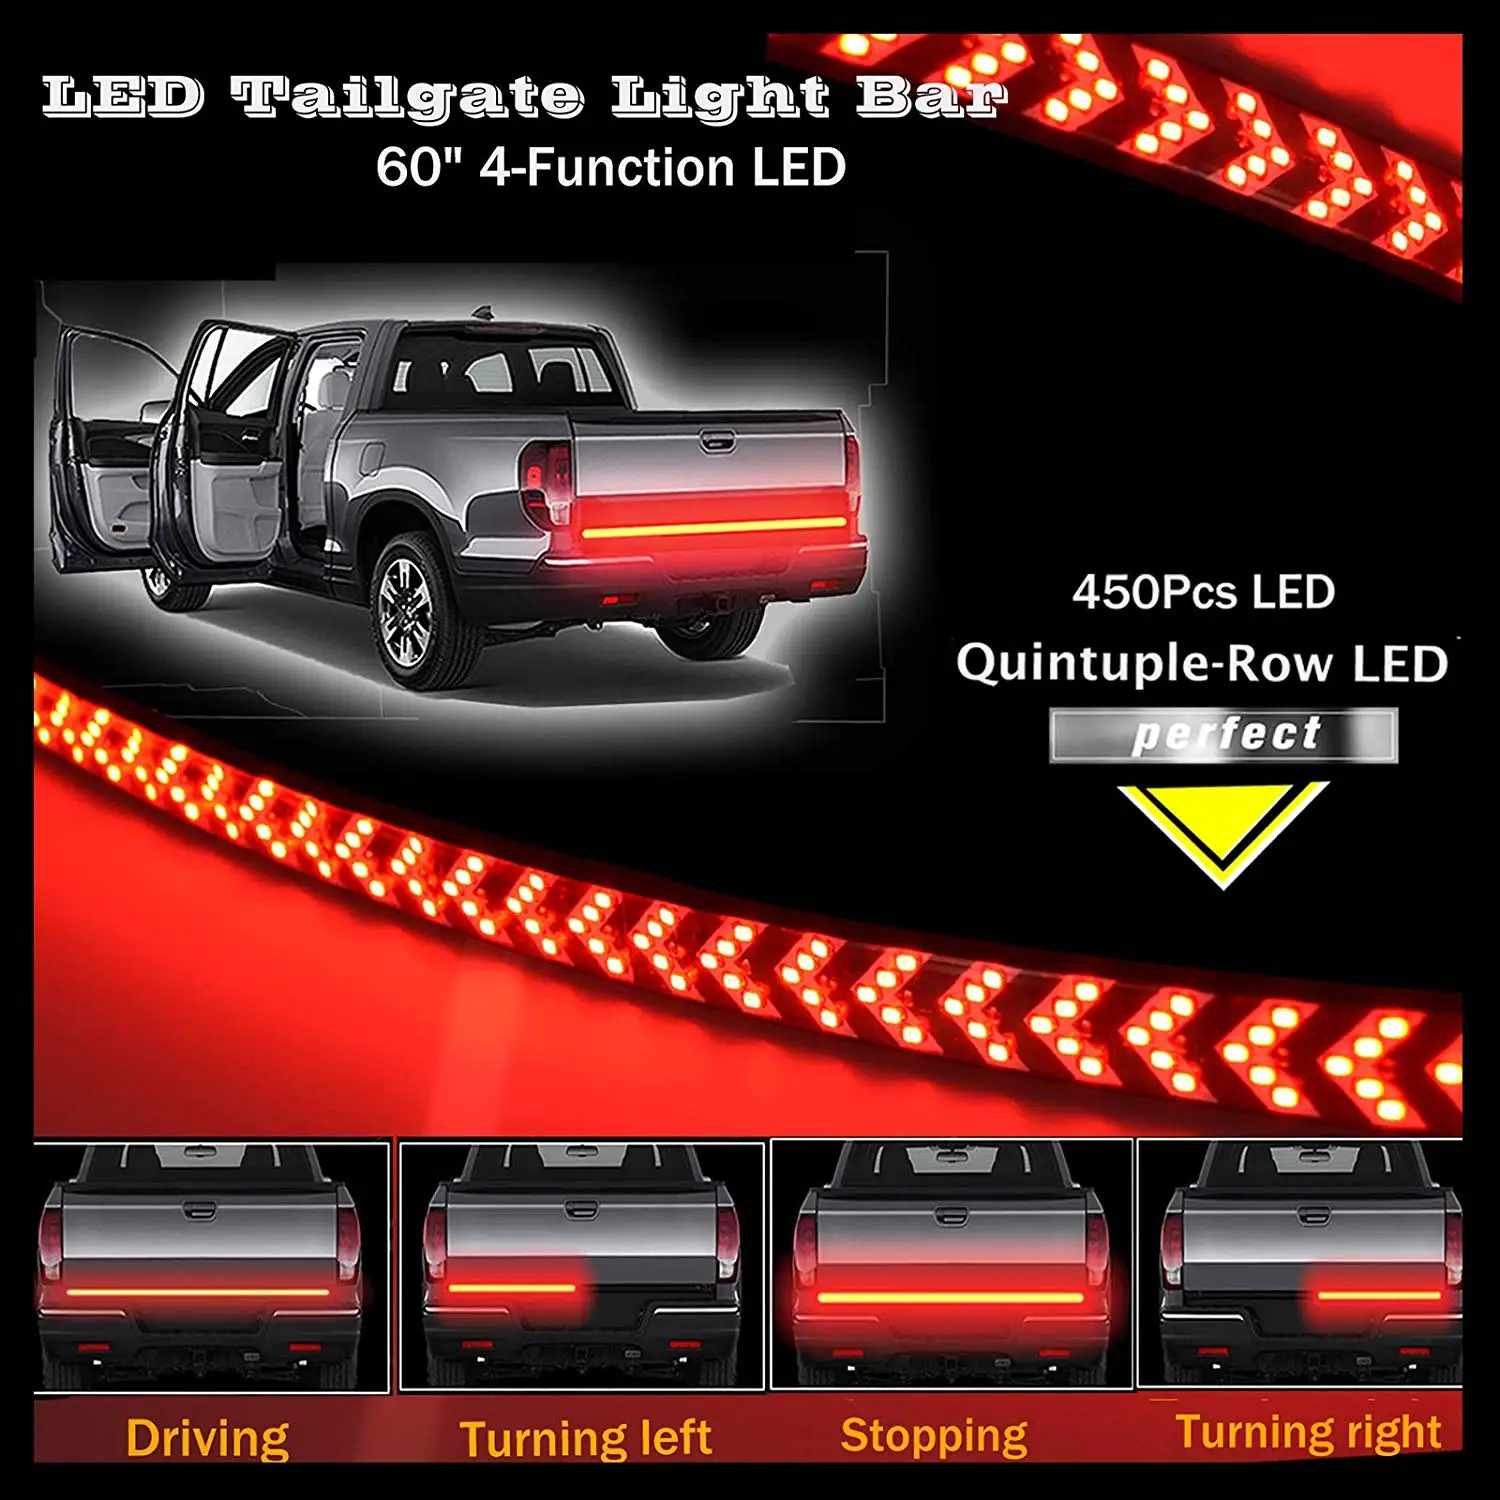 1 Piece Brake CK Formula 60” Double Row LED Tailgate Light Bar 5 Functions: Reverse 2935 SMD LED Chips Turn Signal 12V Running IP67 Waterproof Double Flash Light Strip for Trucks 